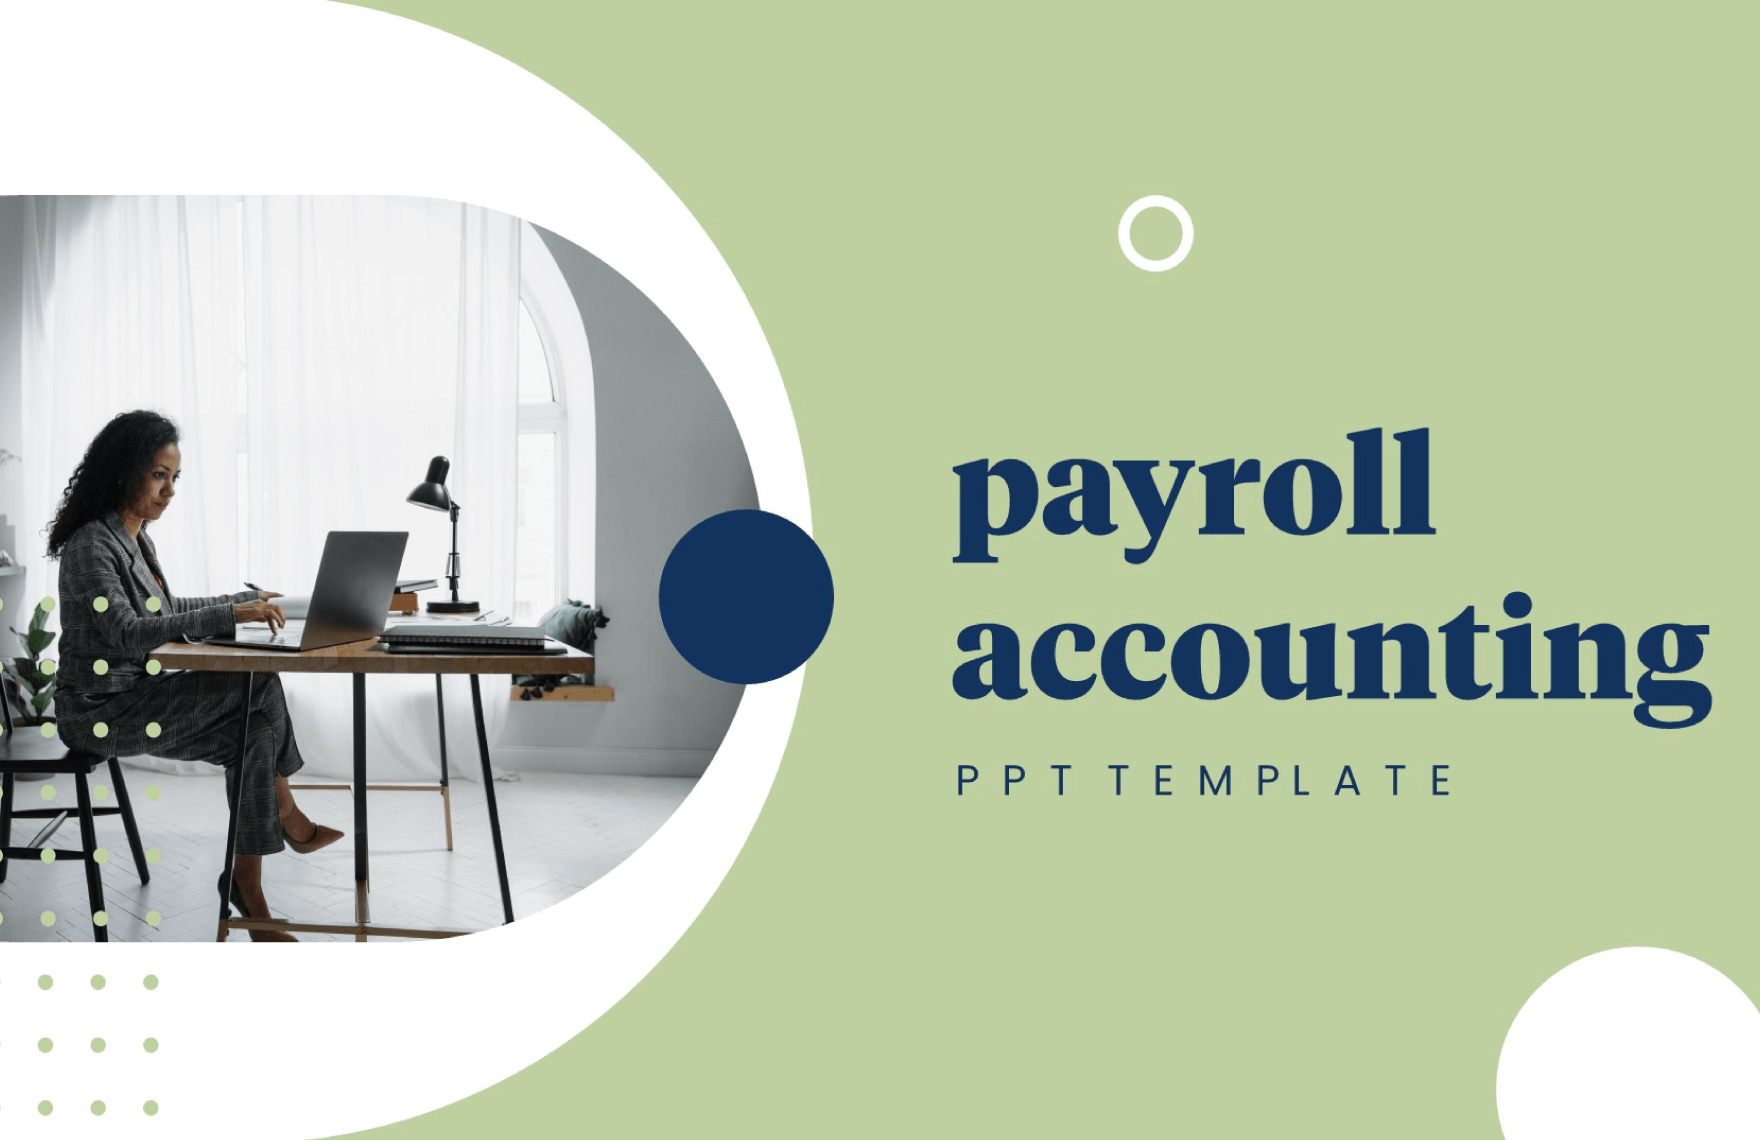 Payroll Accounting PPT Template